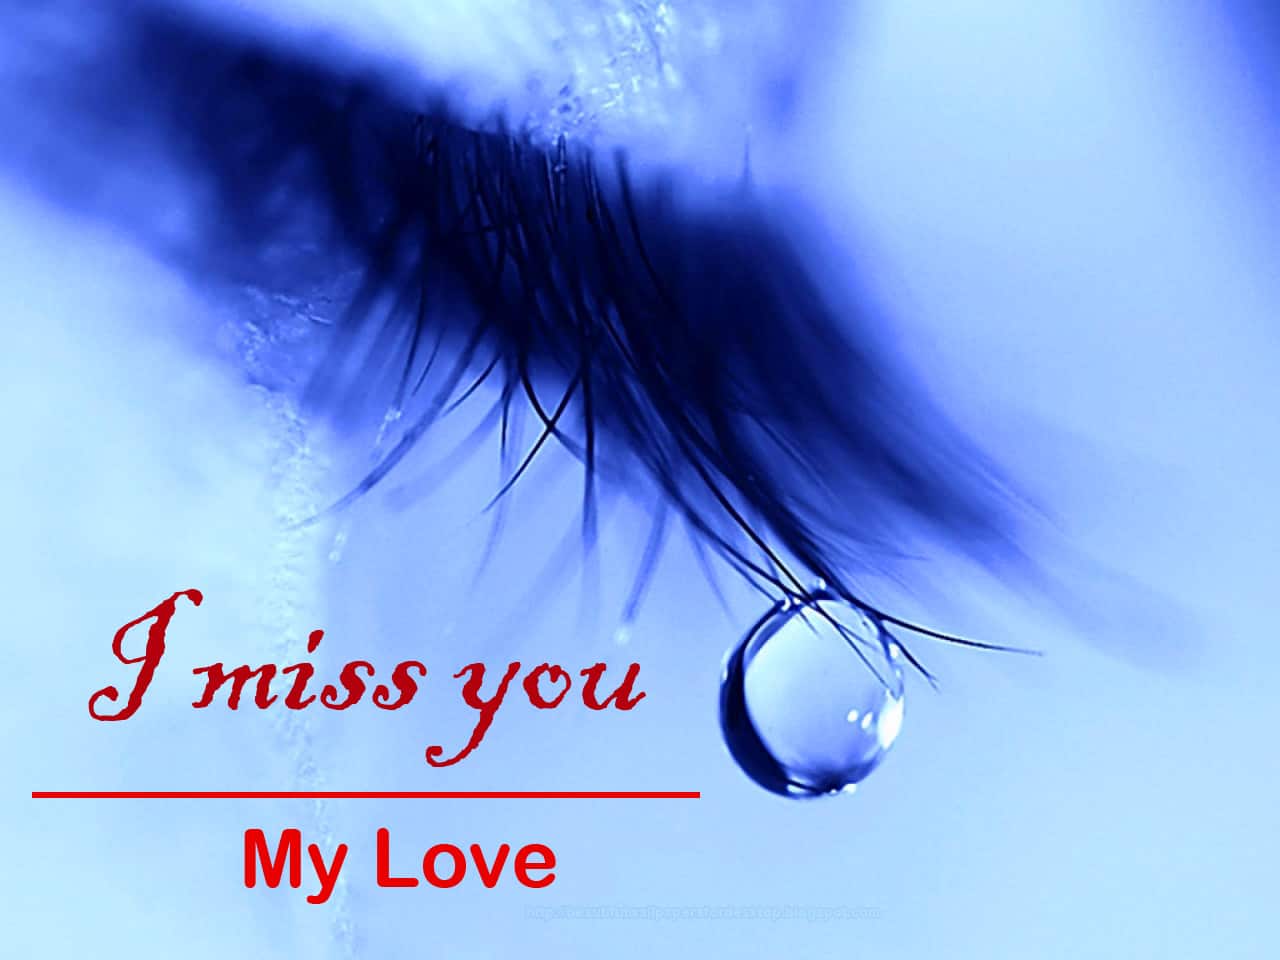 100+] I Miss You Images, Photo, Pic & Wallpaper (HD)